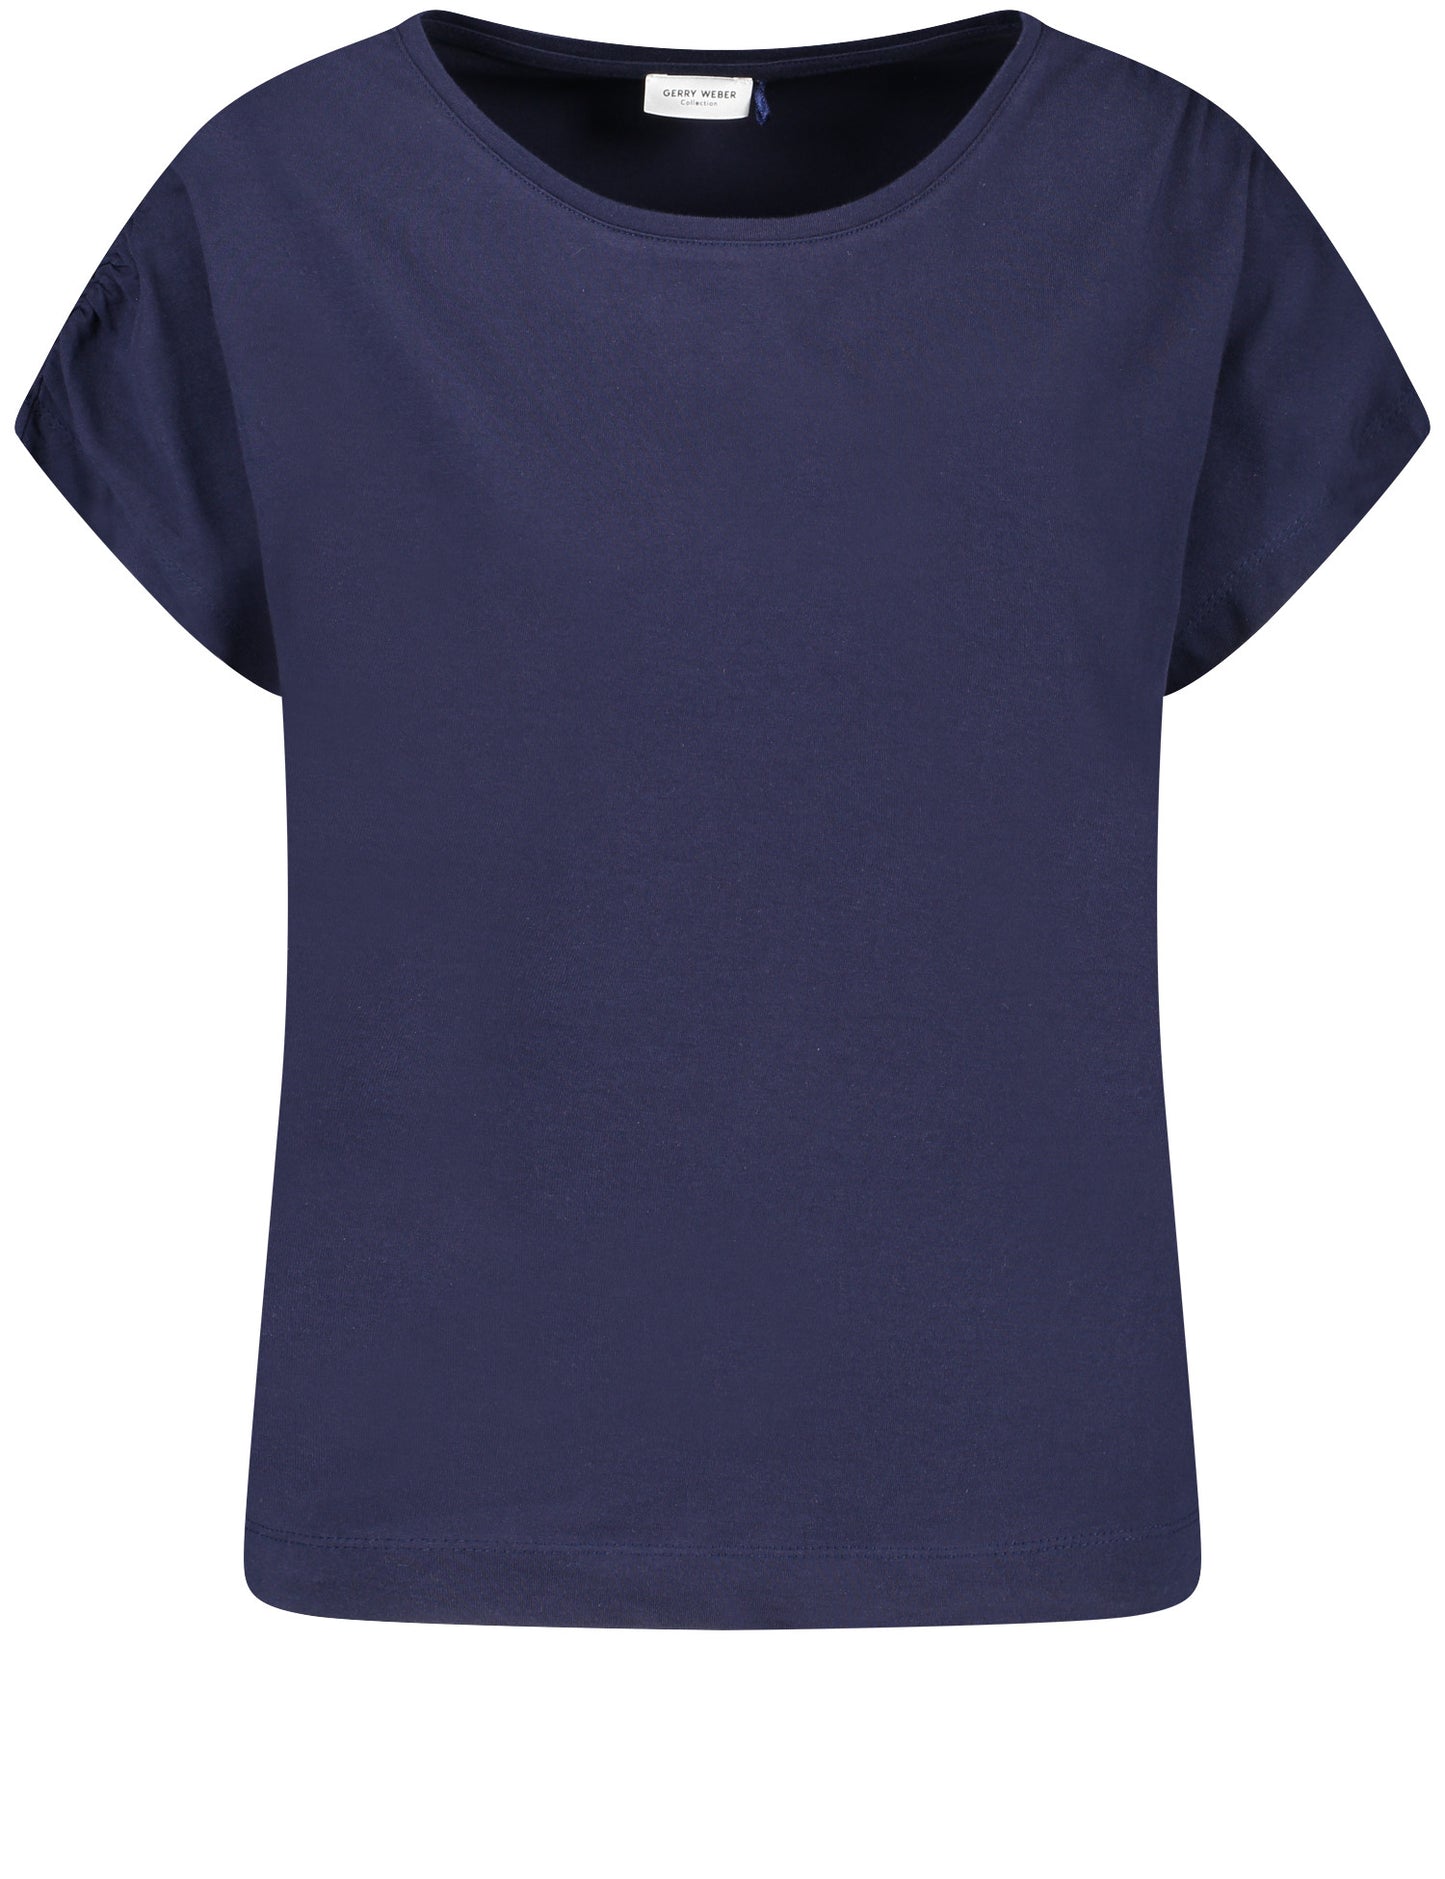 Short-sleeved shirt with gathered sleeves